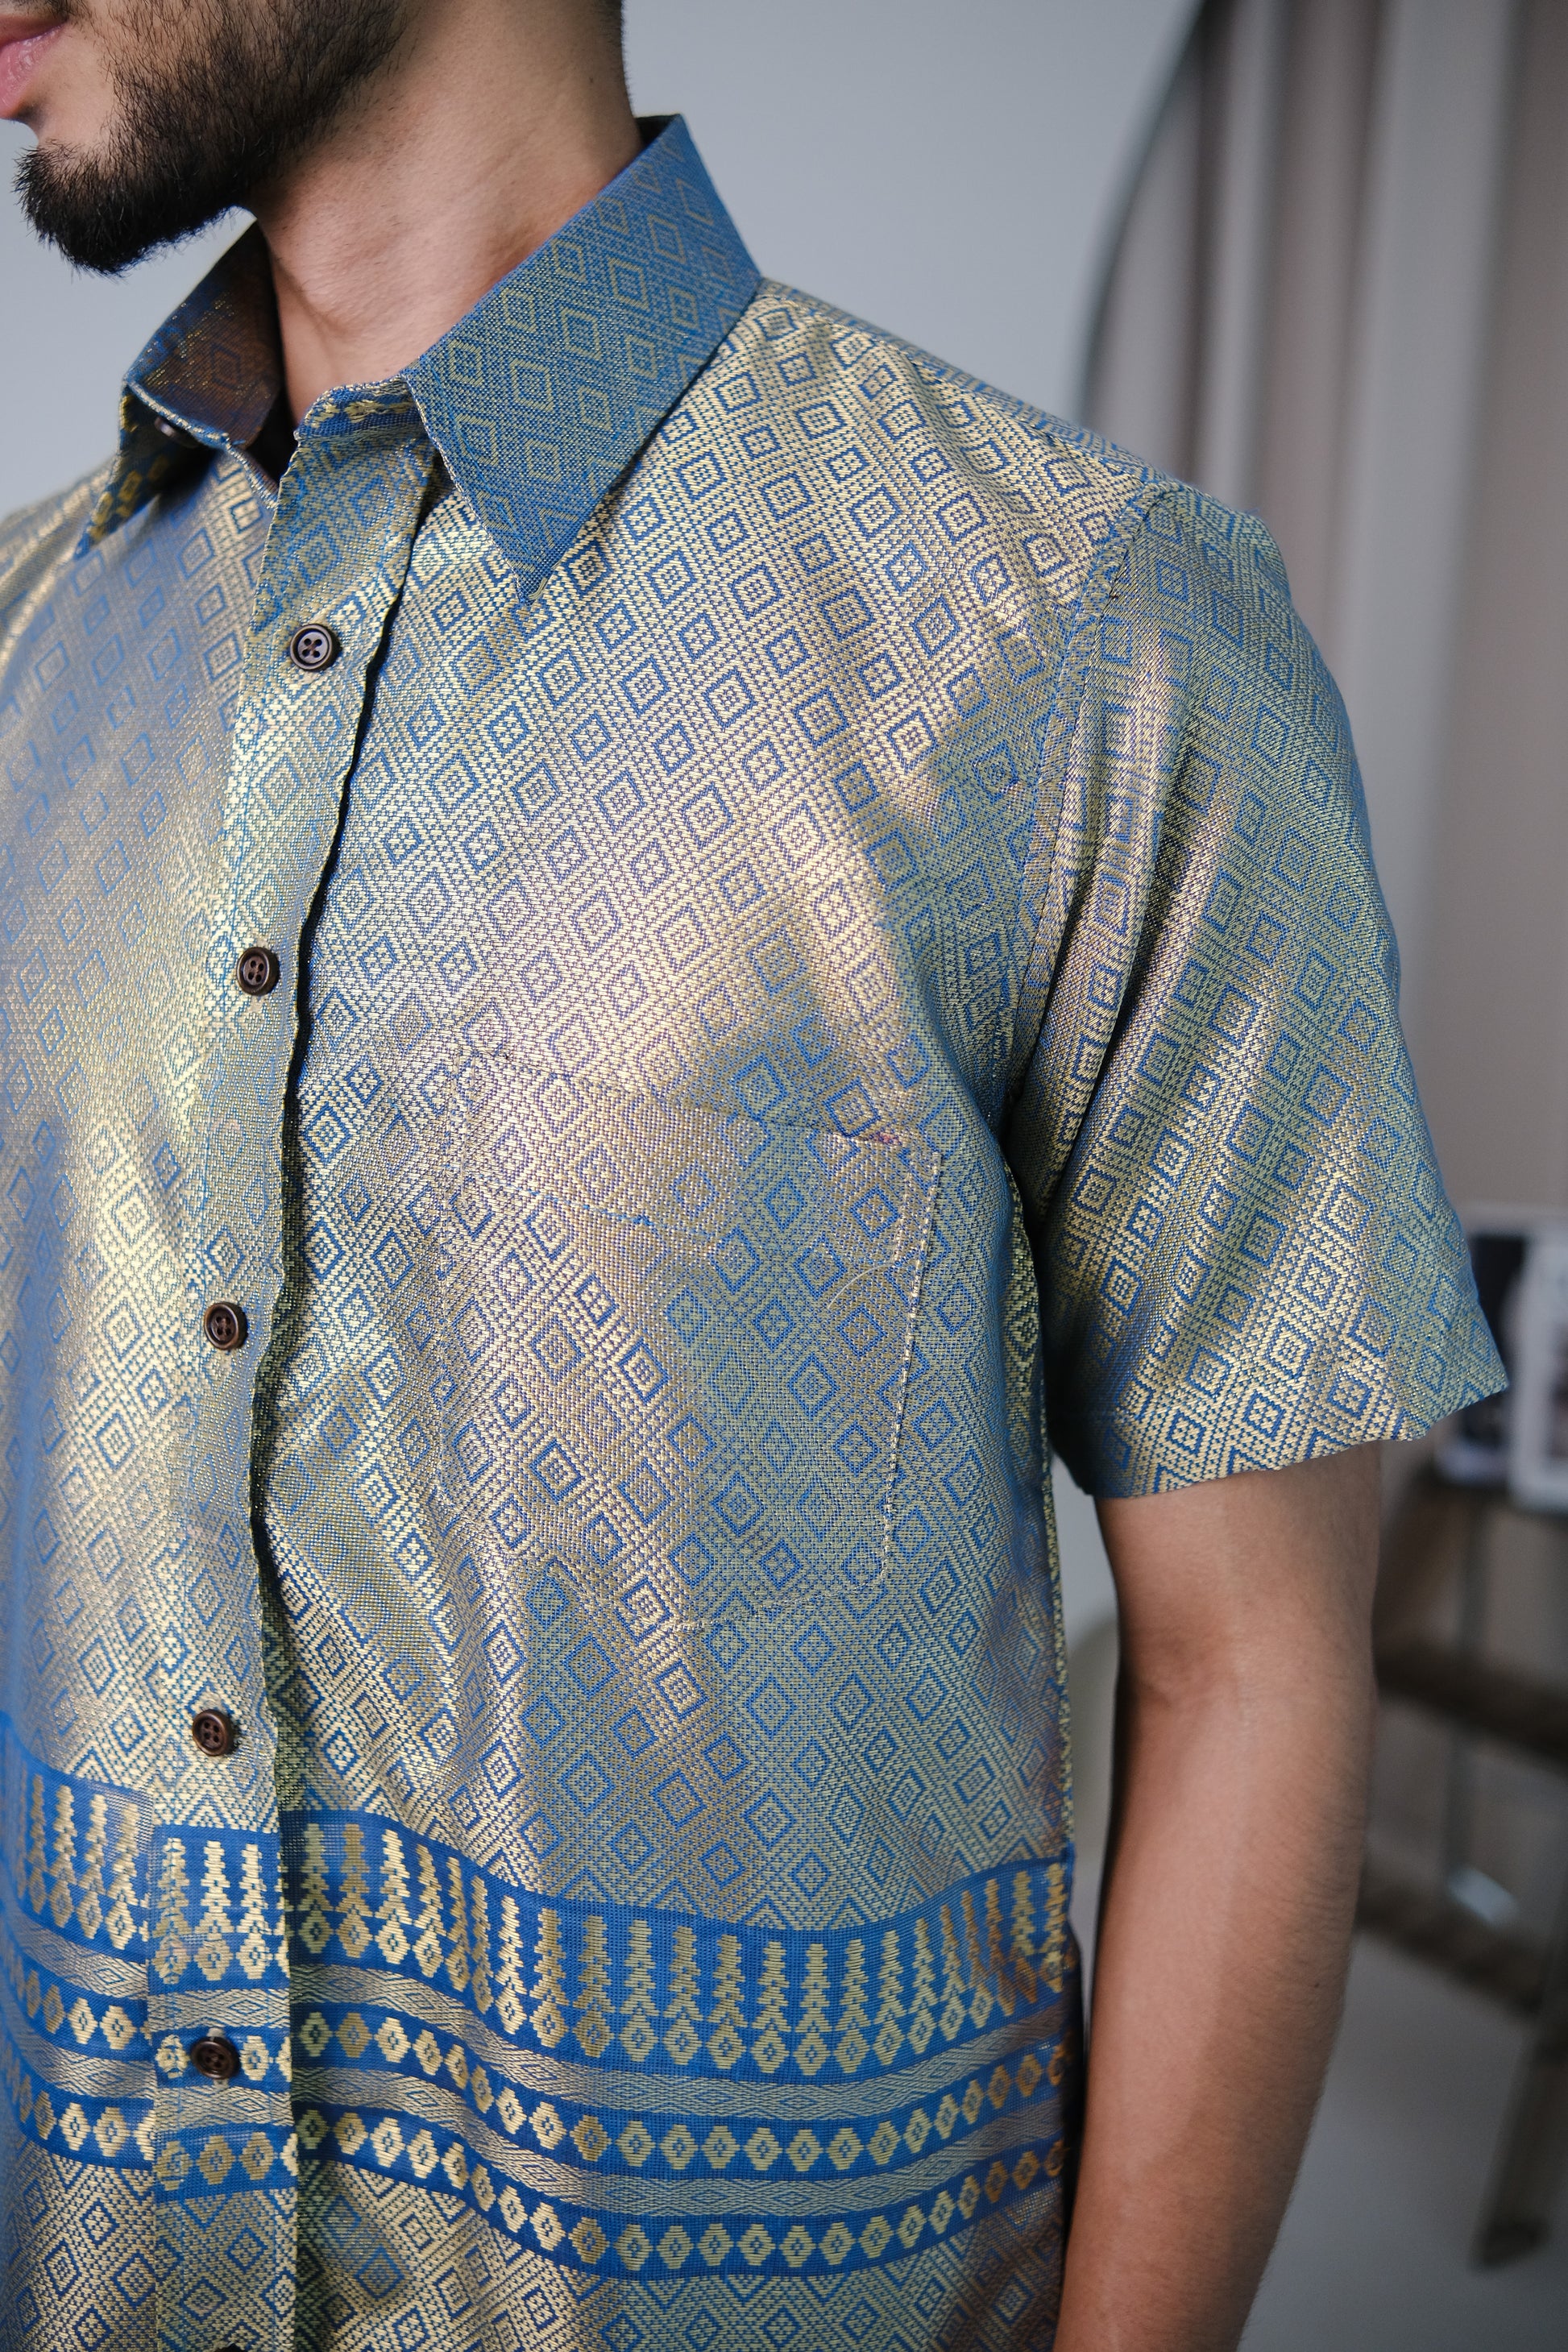 lux qamis songket shirt in blue and gold - jia.basics